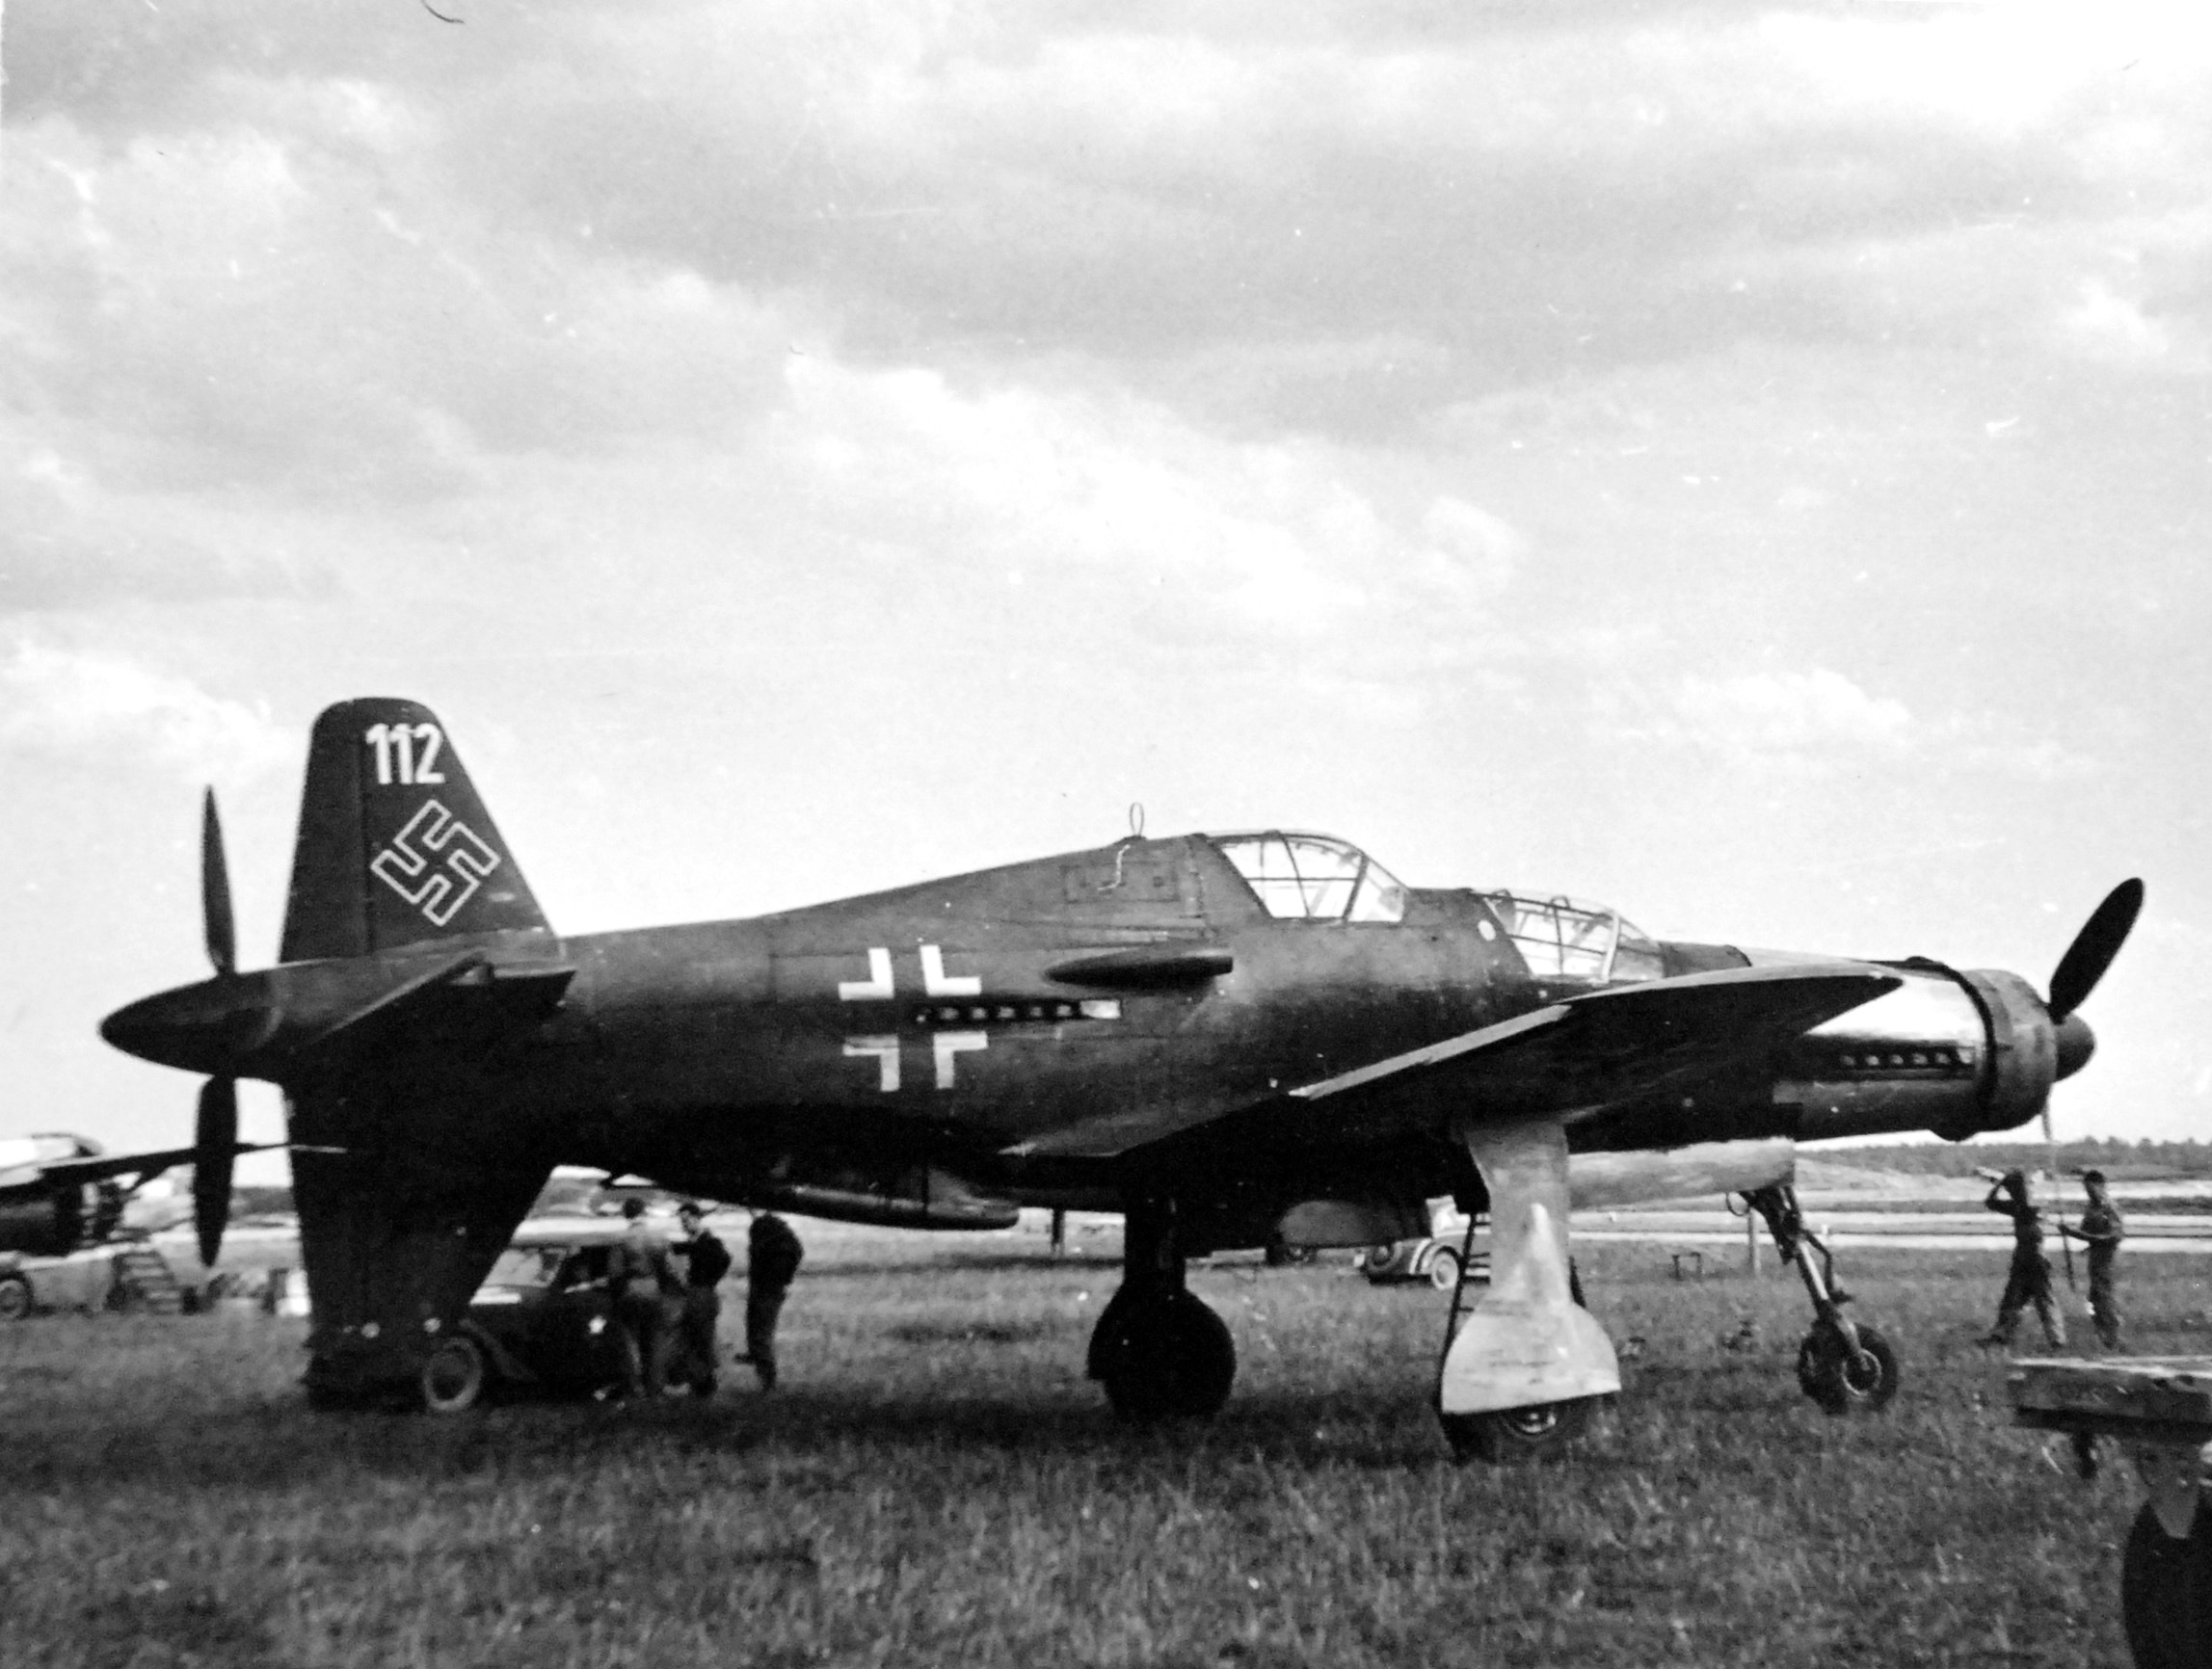 Two-seat variant of the Do-335 Pfeil (arrow) known as the Ameisenbär (anteater) on a German airfield after capture by the United States Army, mid-1945.